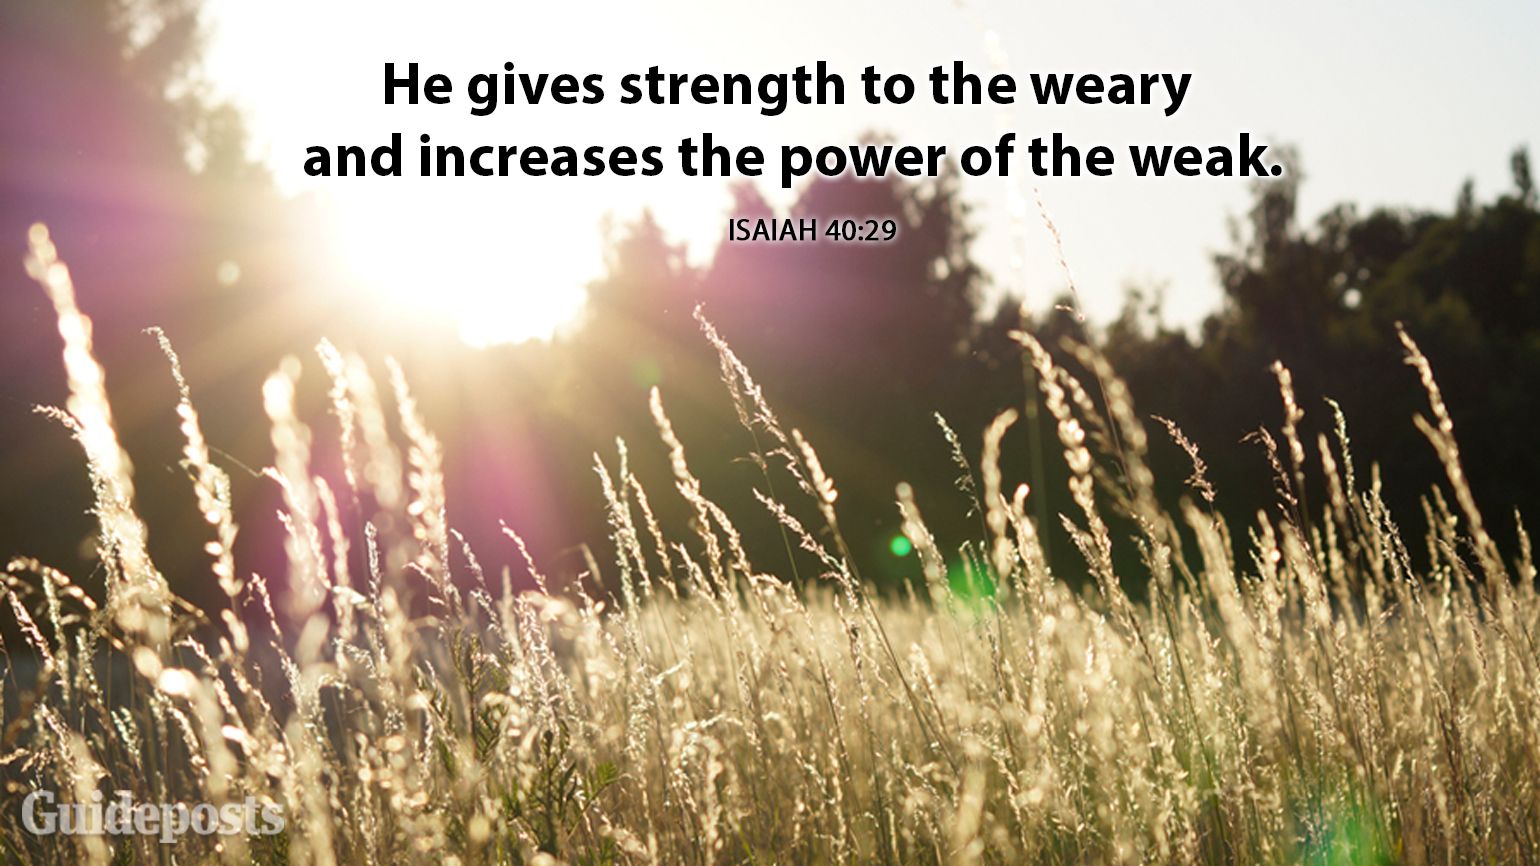 He gives strength to the weary and increases the power of the weak